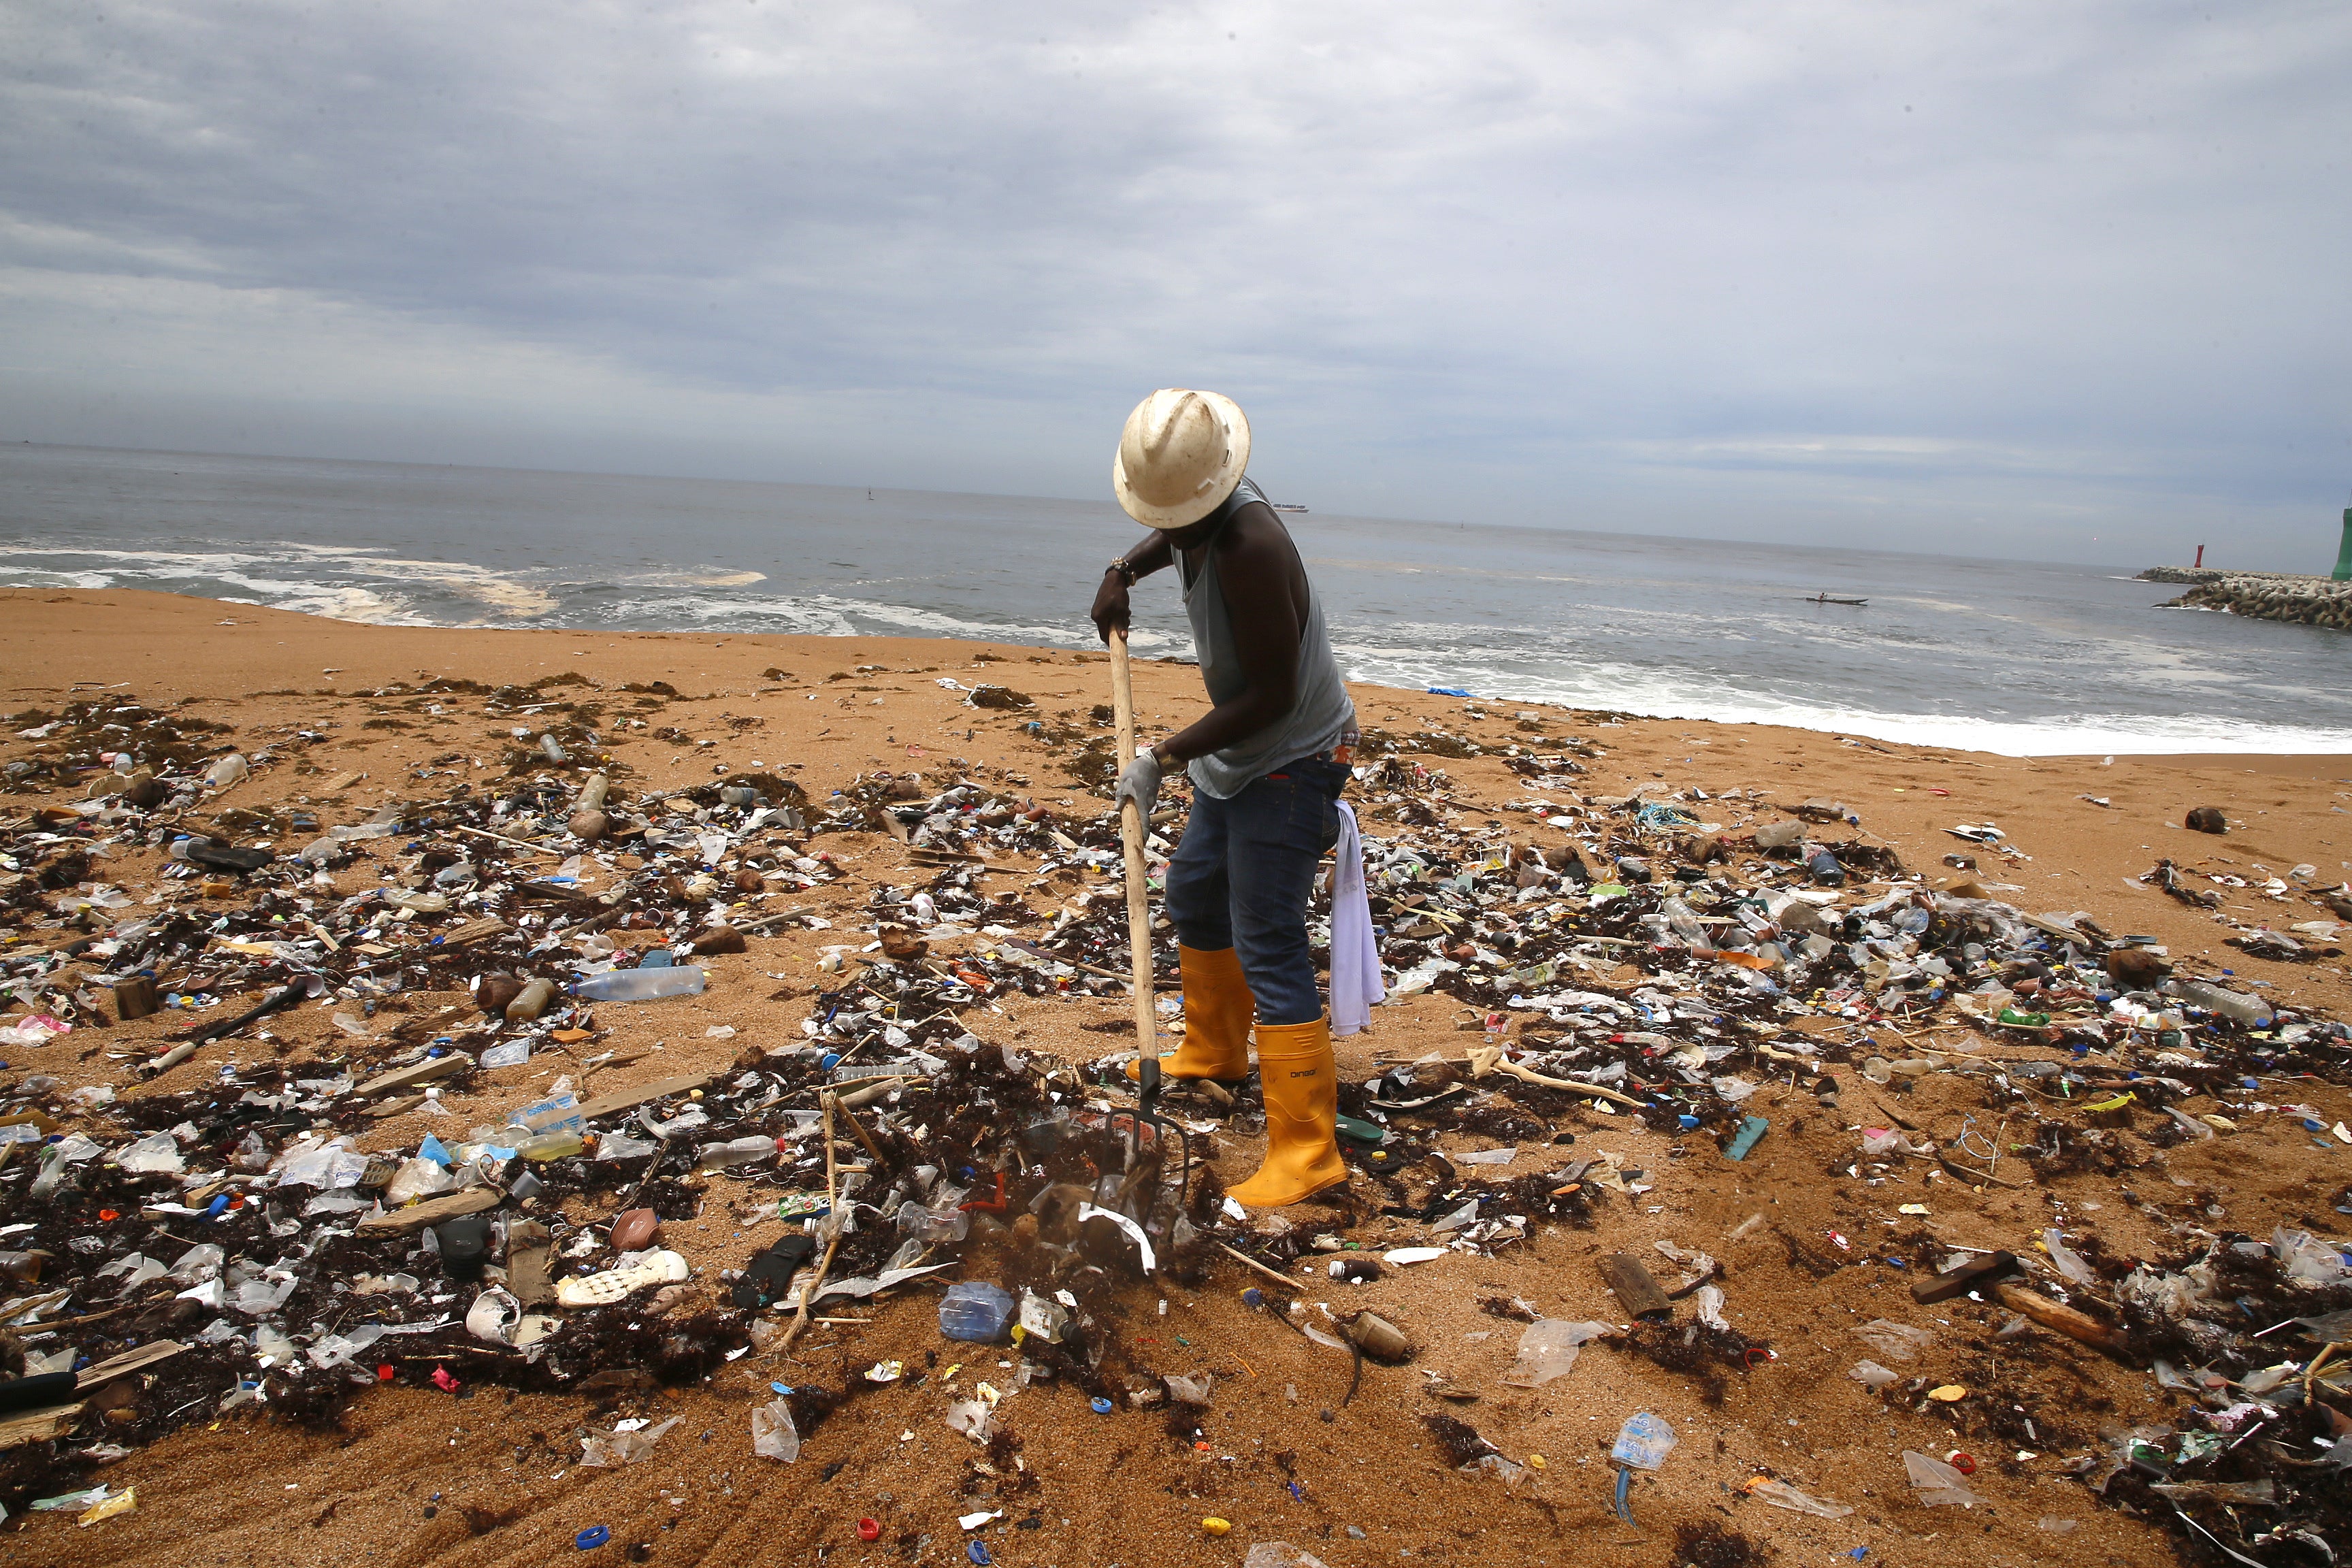 A member of an environmental NGO cleans plastic debris from Vridi beach in Abidjan, Ivory Coast